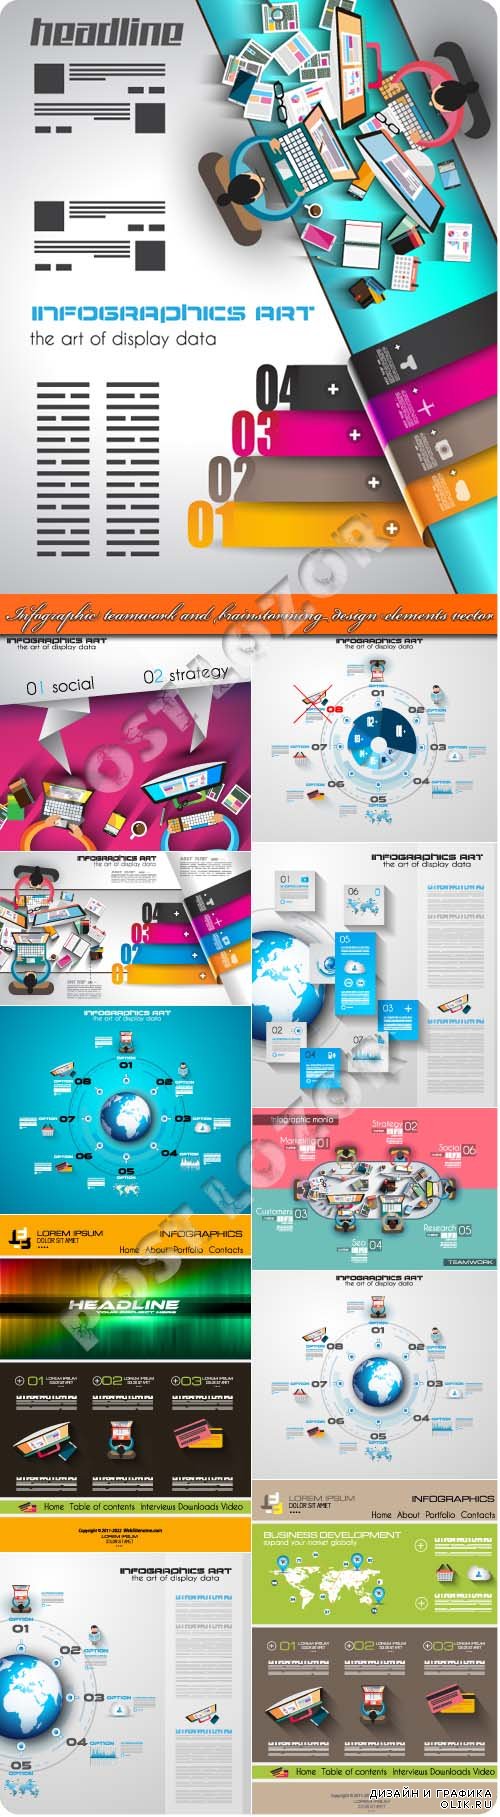 Infographic teamwork and brainstorming design elements vector